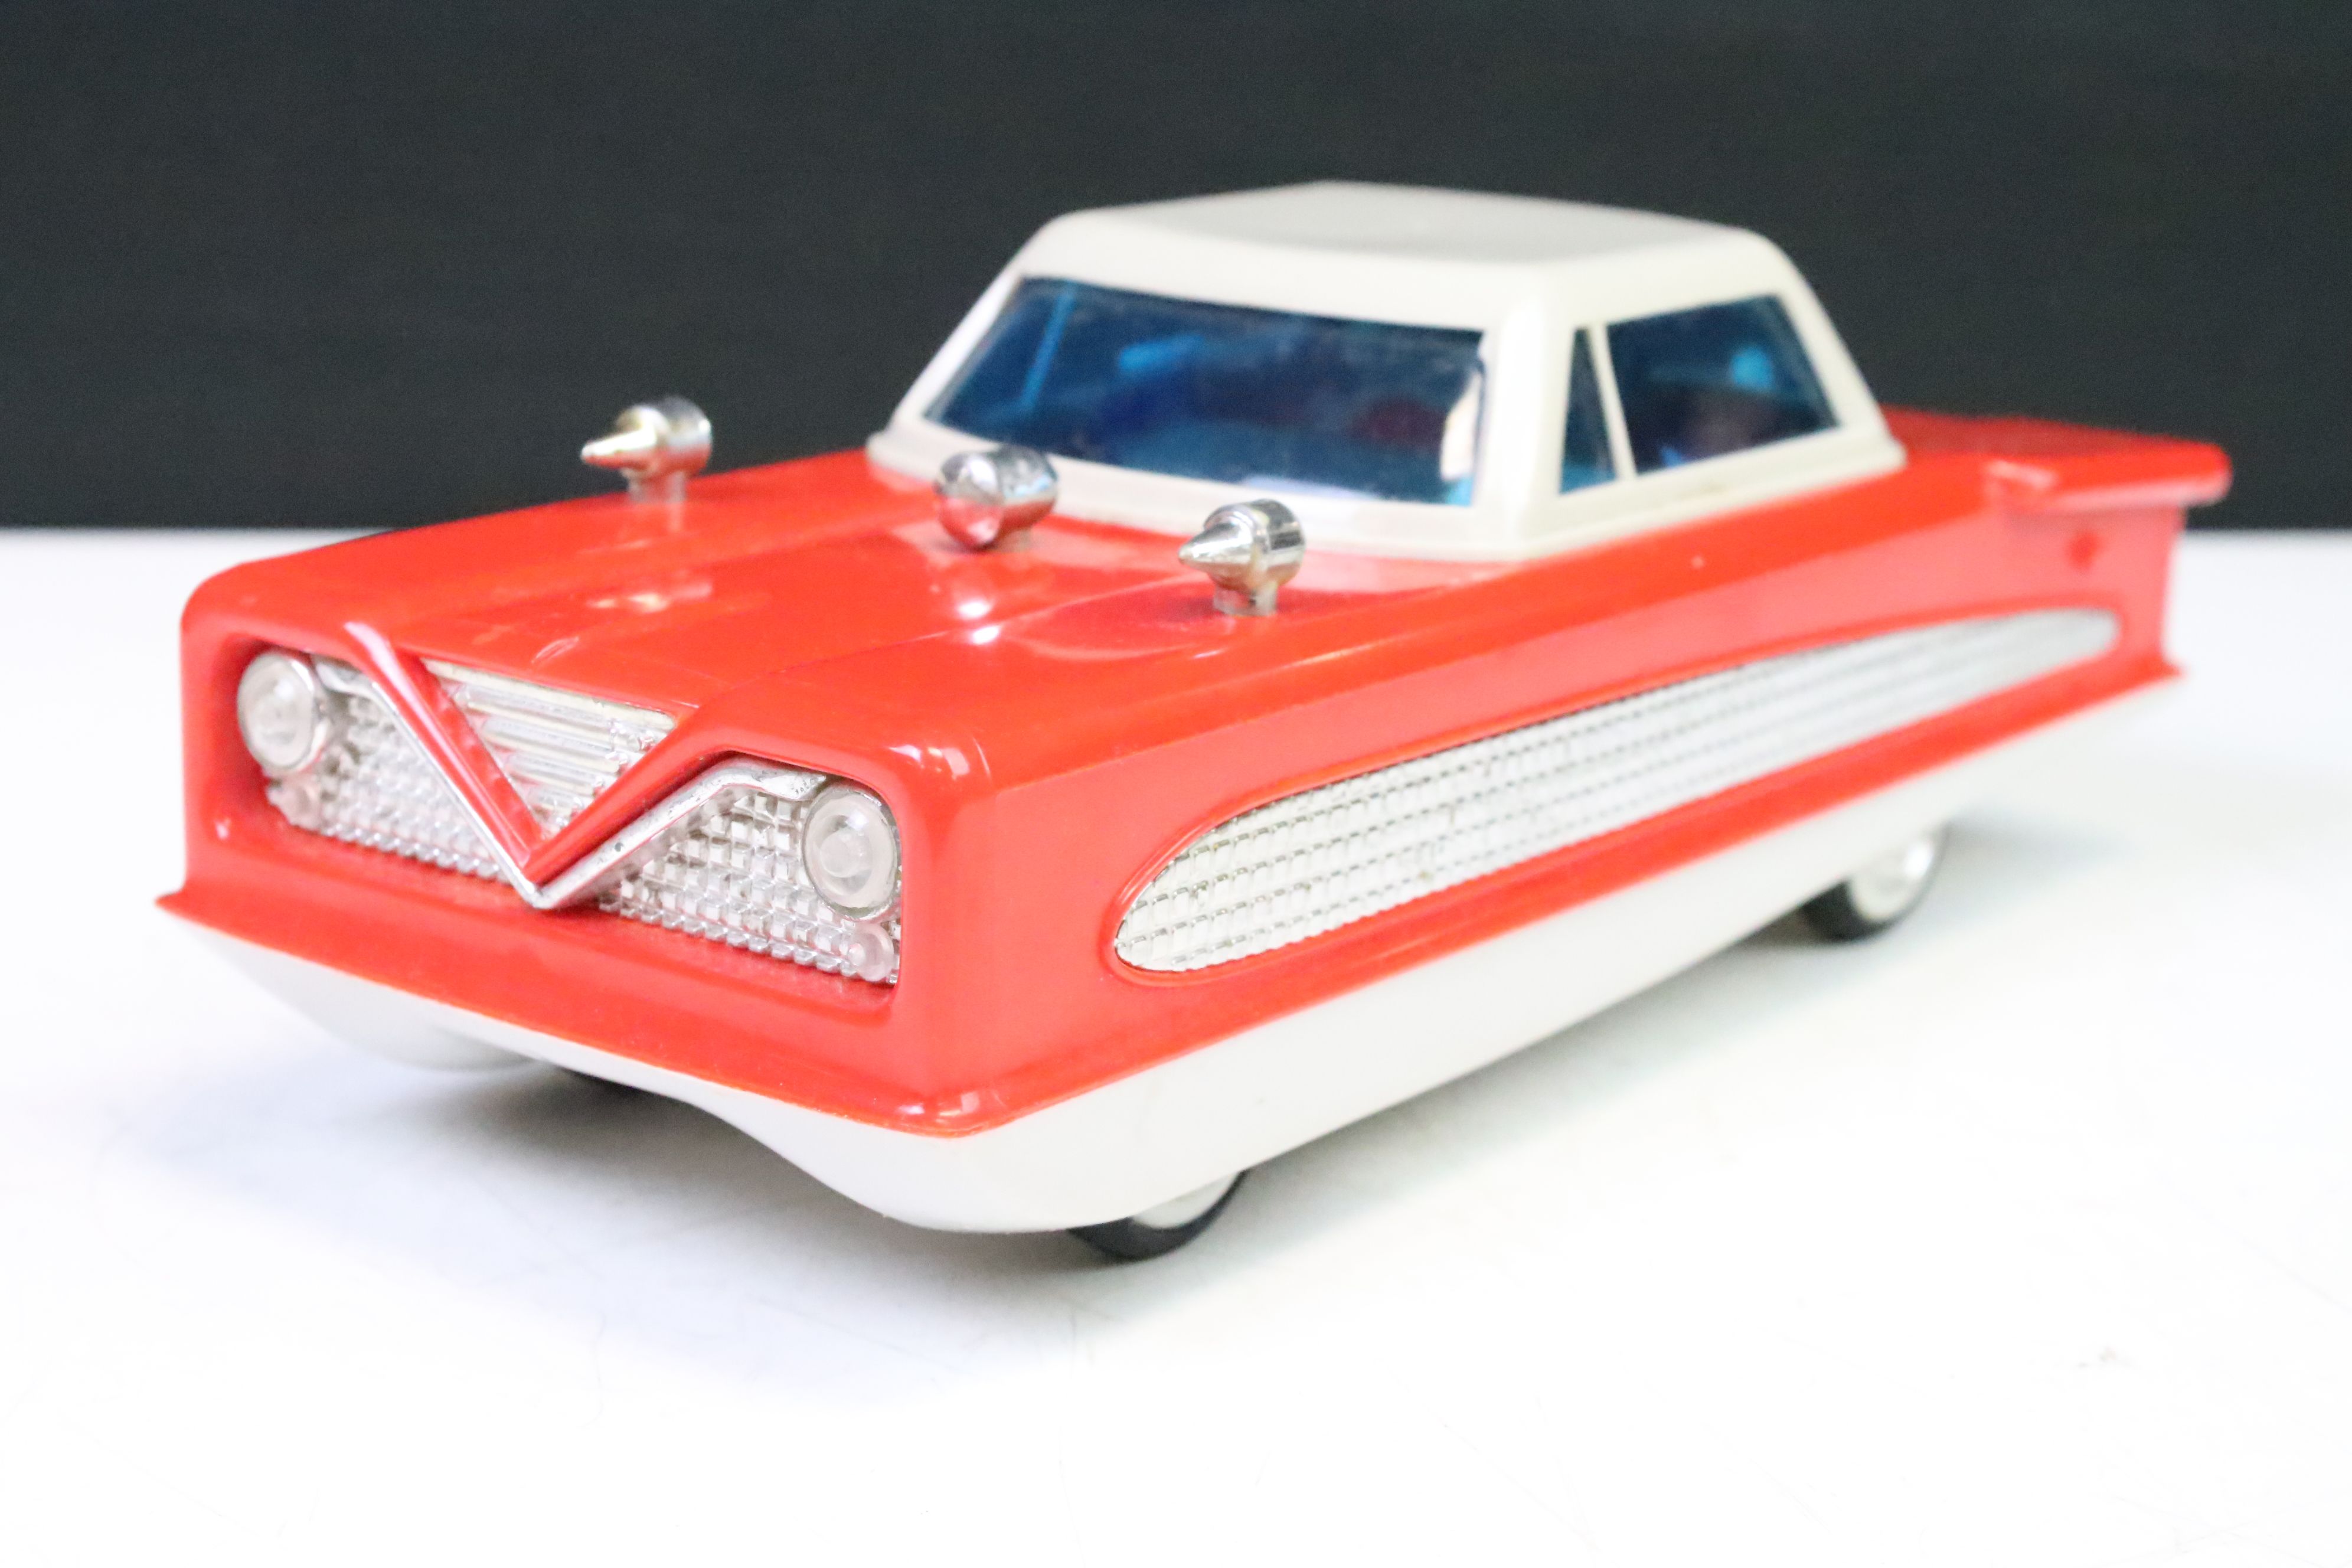 Boxed HIS (Hong Kong) battery operated No R3317 Amphibious Car plastic model in red & white, vg with - Image 2 of 4